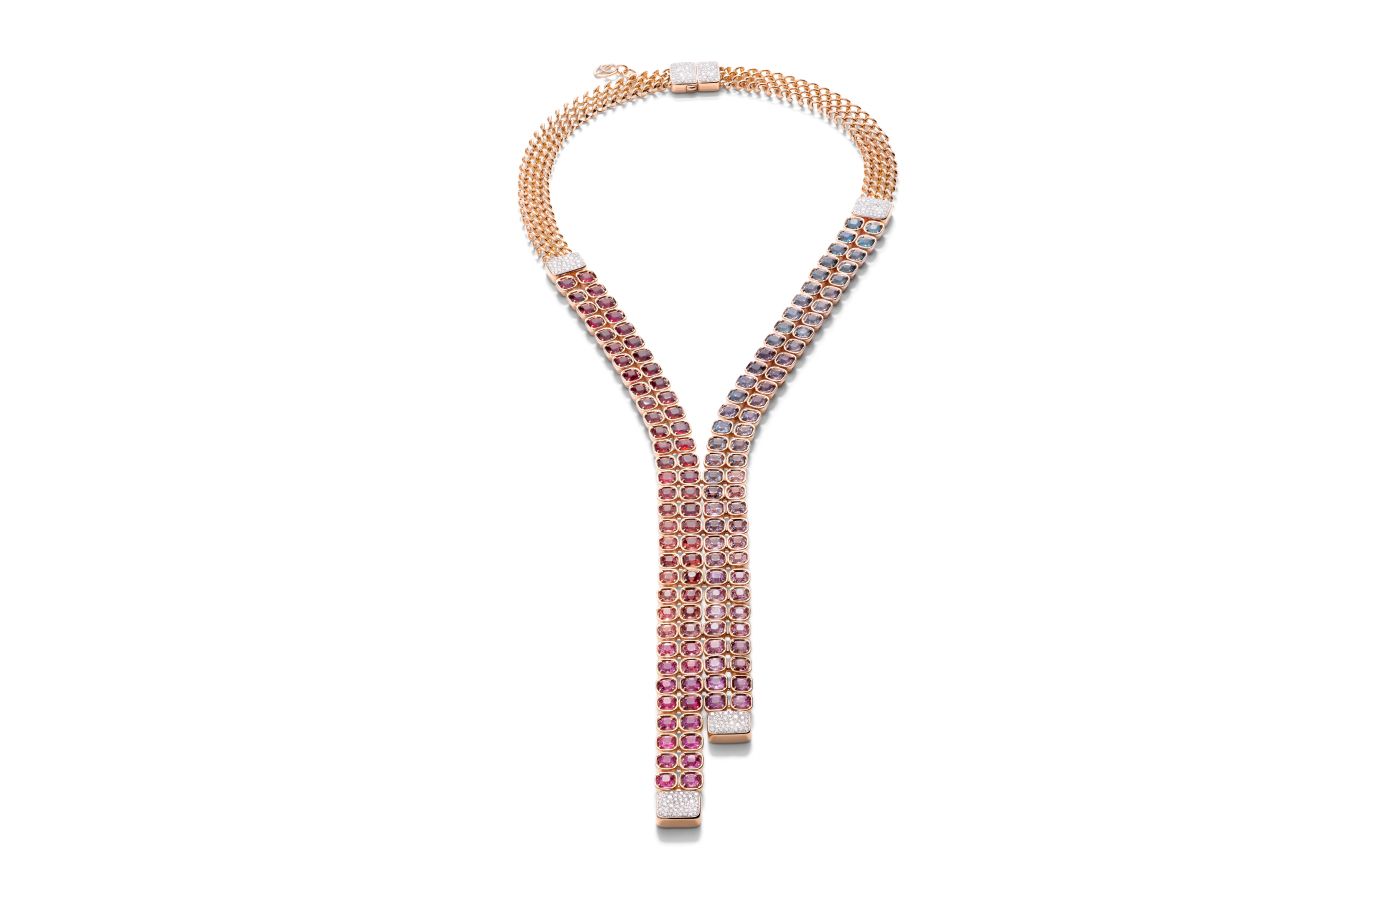 Pomellato Skyline necklace in rose gold, 128 spinels and diamonds from the Ode to Milan High Jewellery collection